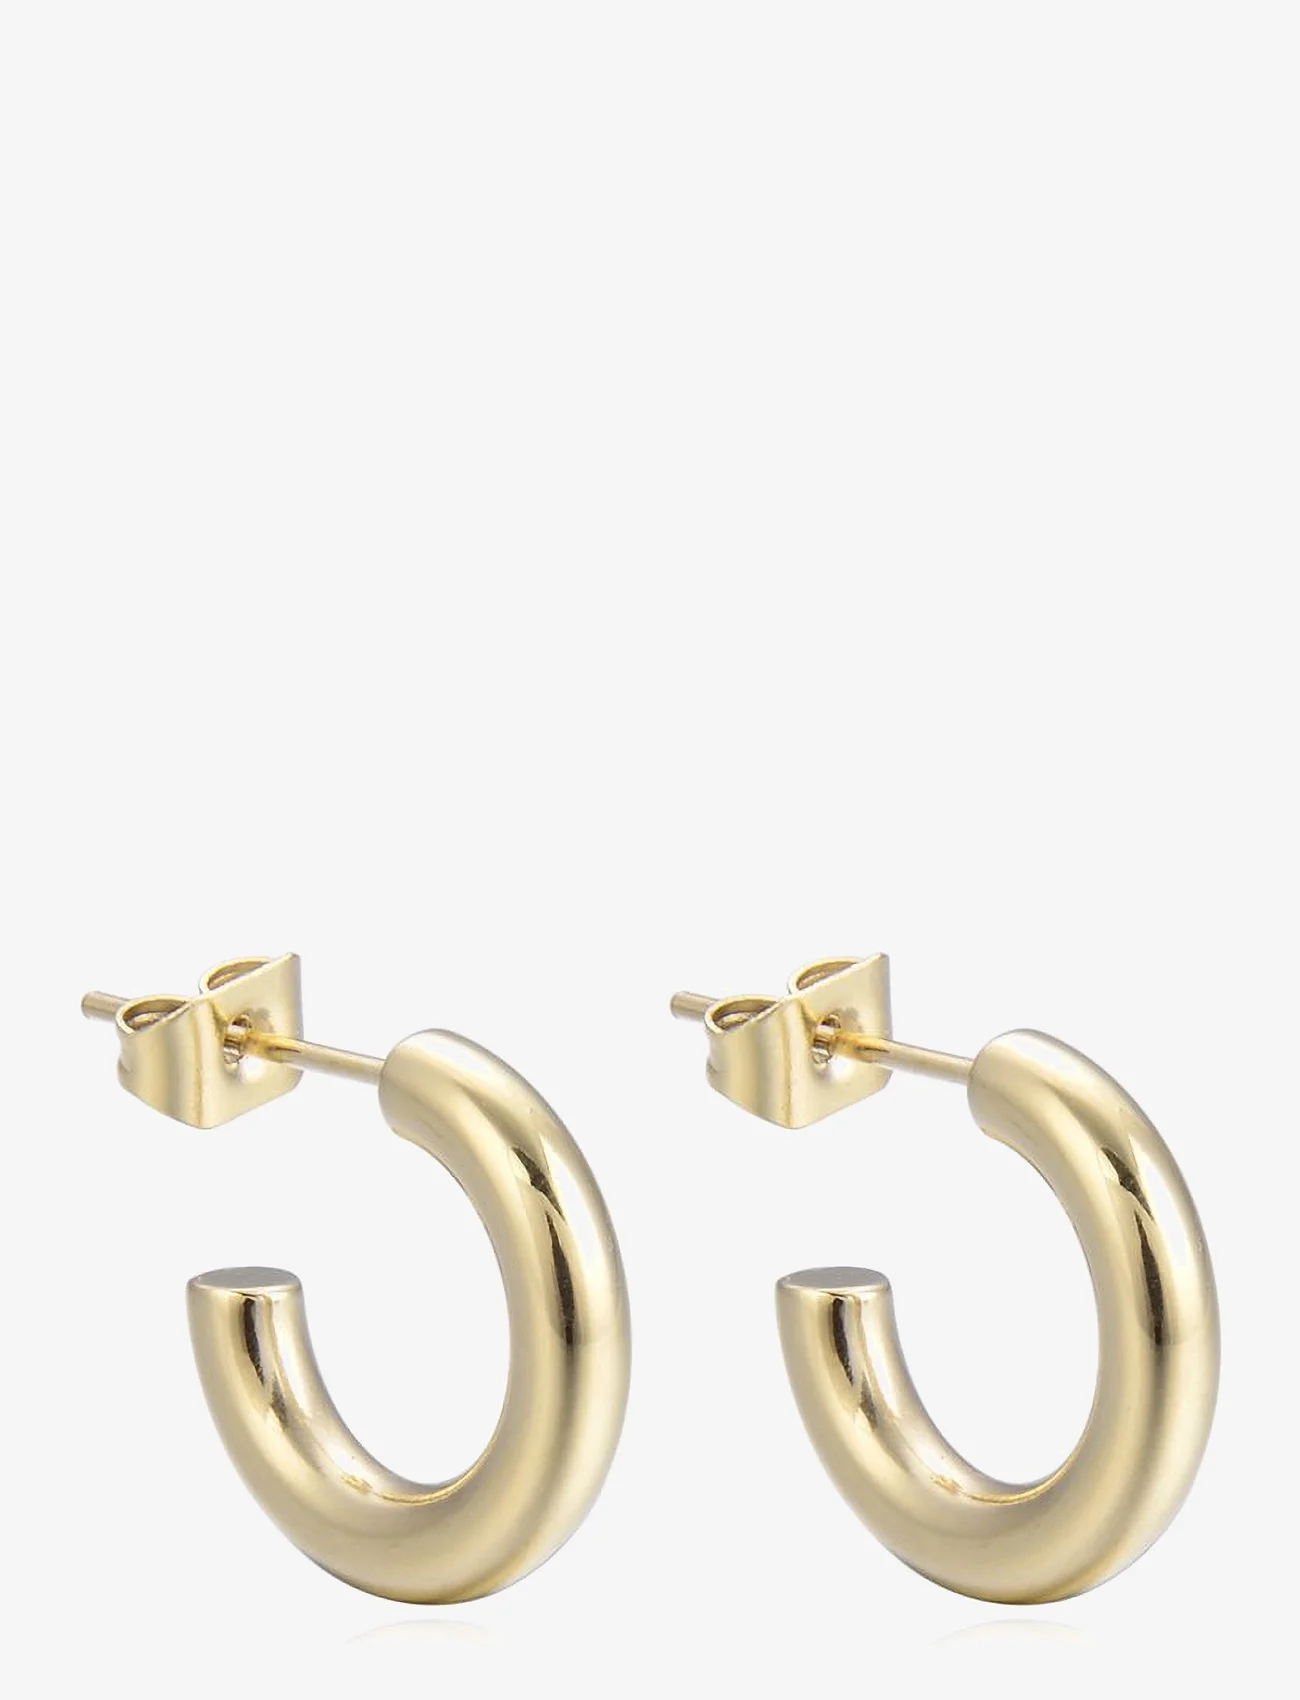 Bud to rose - Hitch Earring - creoler & hoops - gold - 0